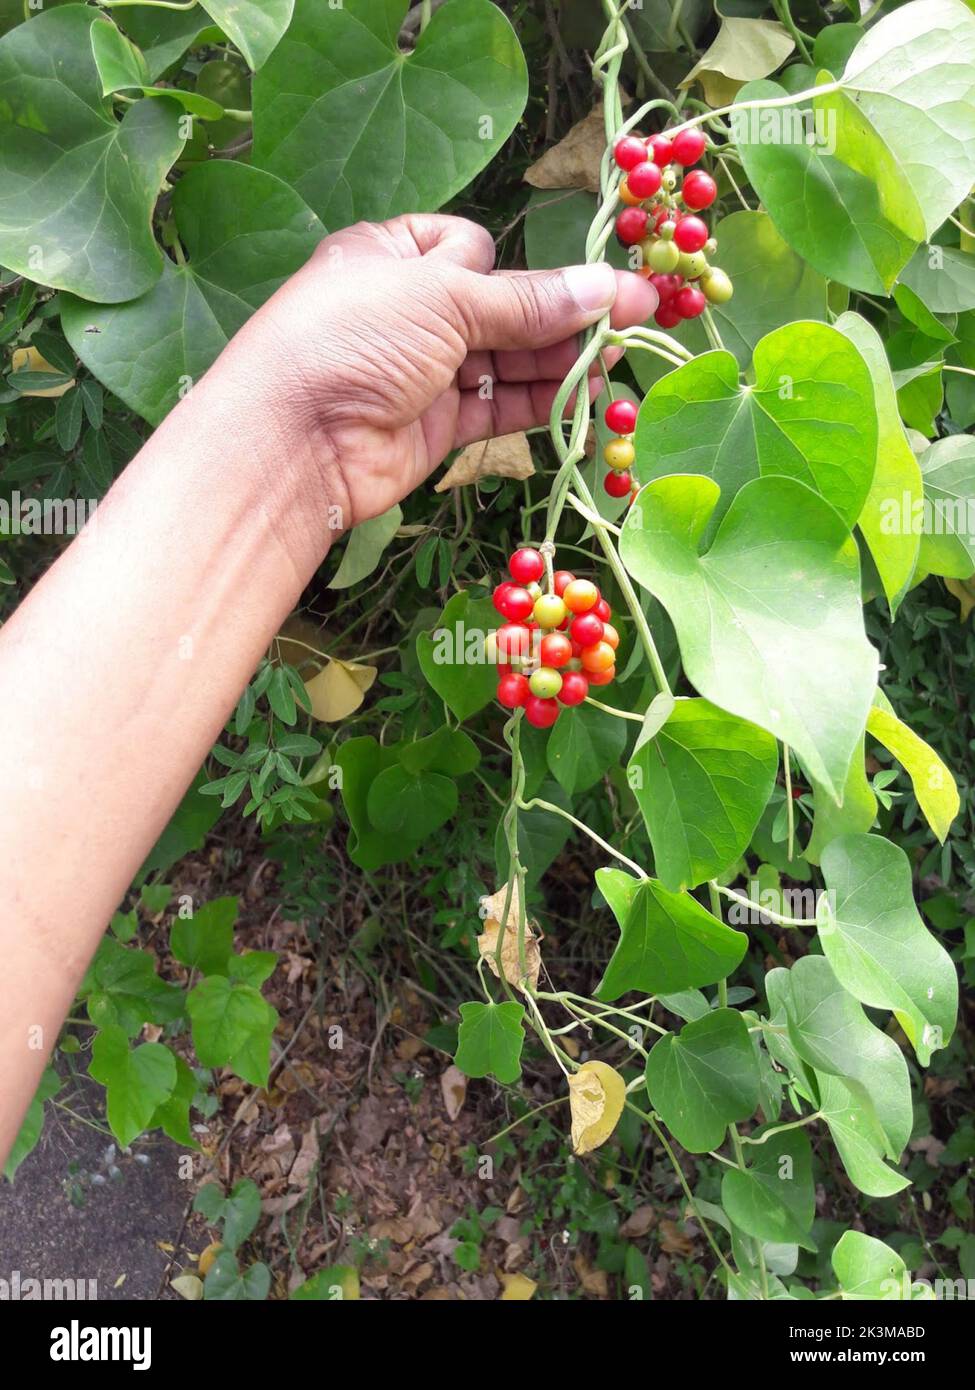 Giloy (English: Tinospora cardifolia) has a multivariate vine. Its leaves are like betel leaves. It is known by many names in Ayurveda, such as Amrita Stock Photo